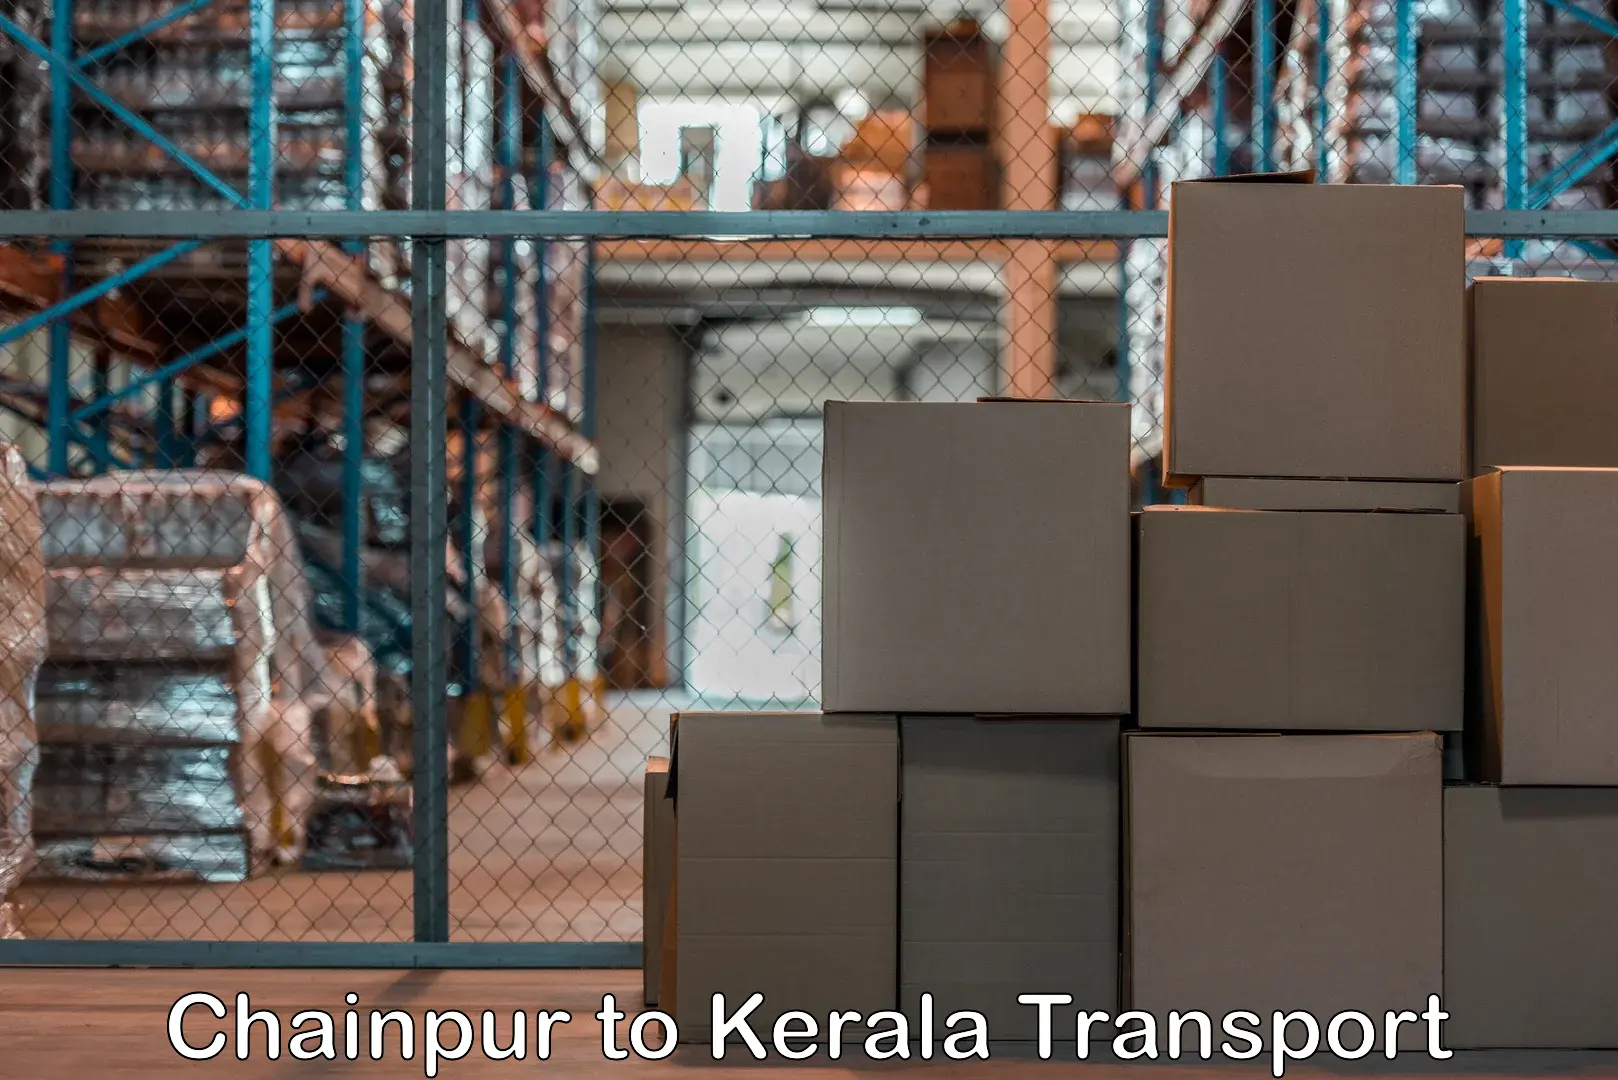 Truck transport companies in India Chainpur to Munnar